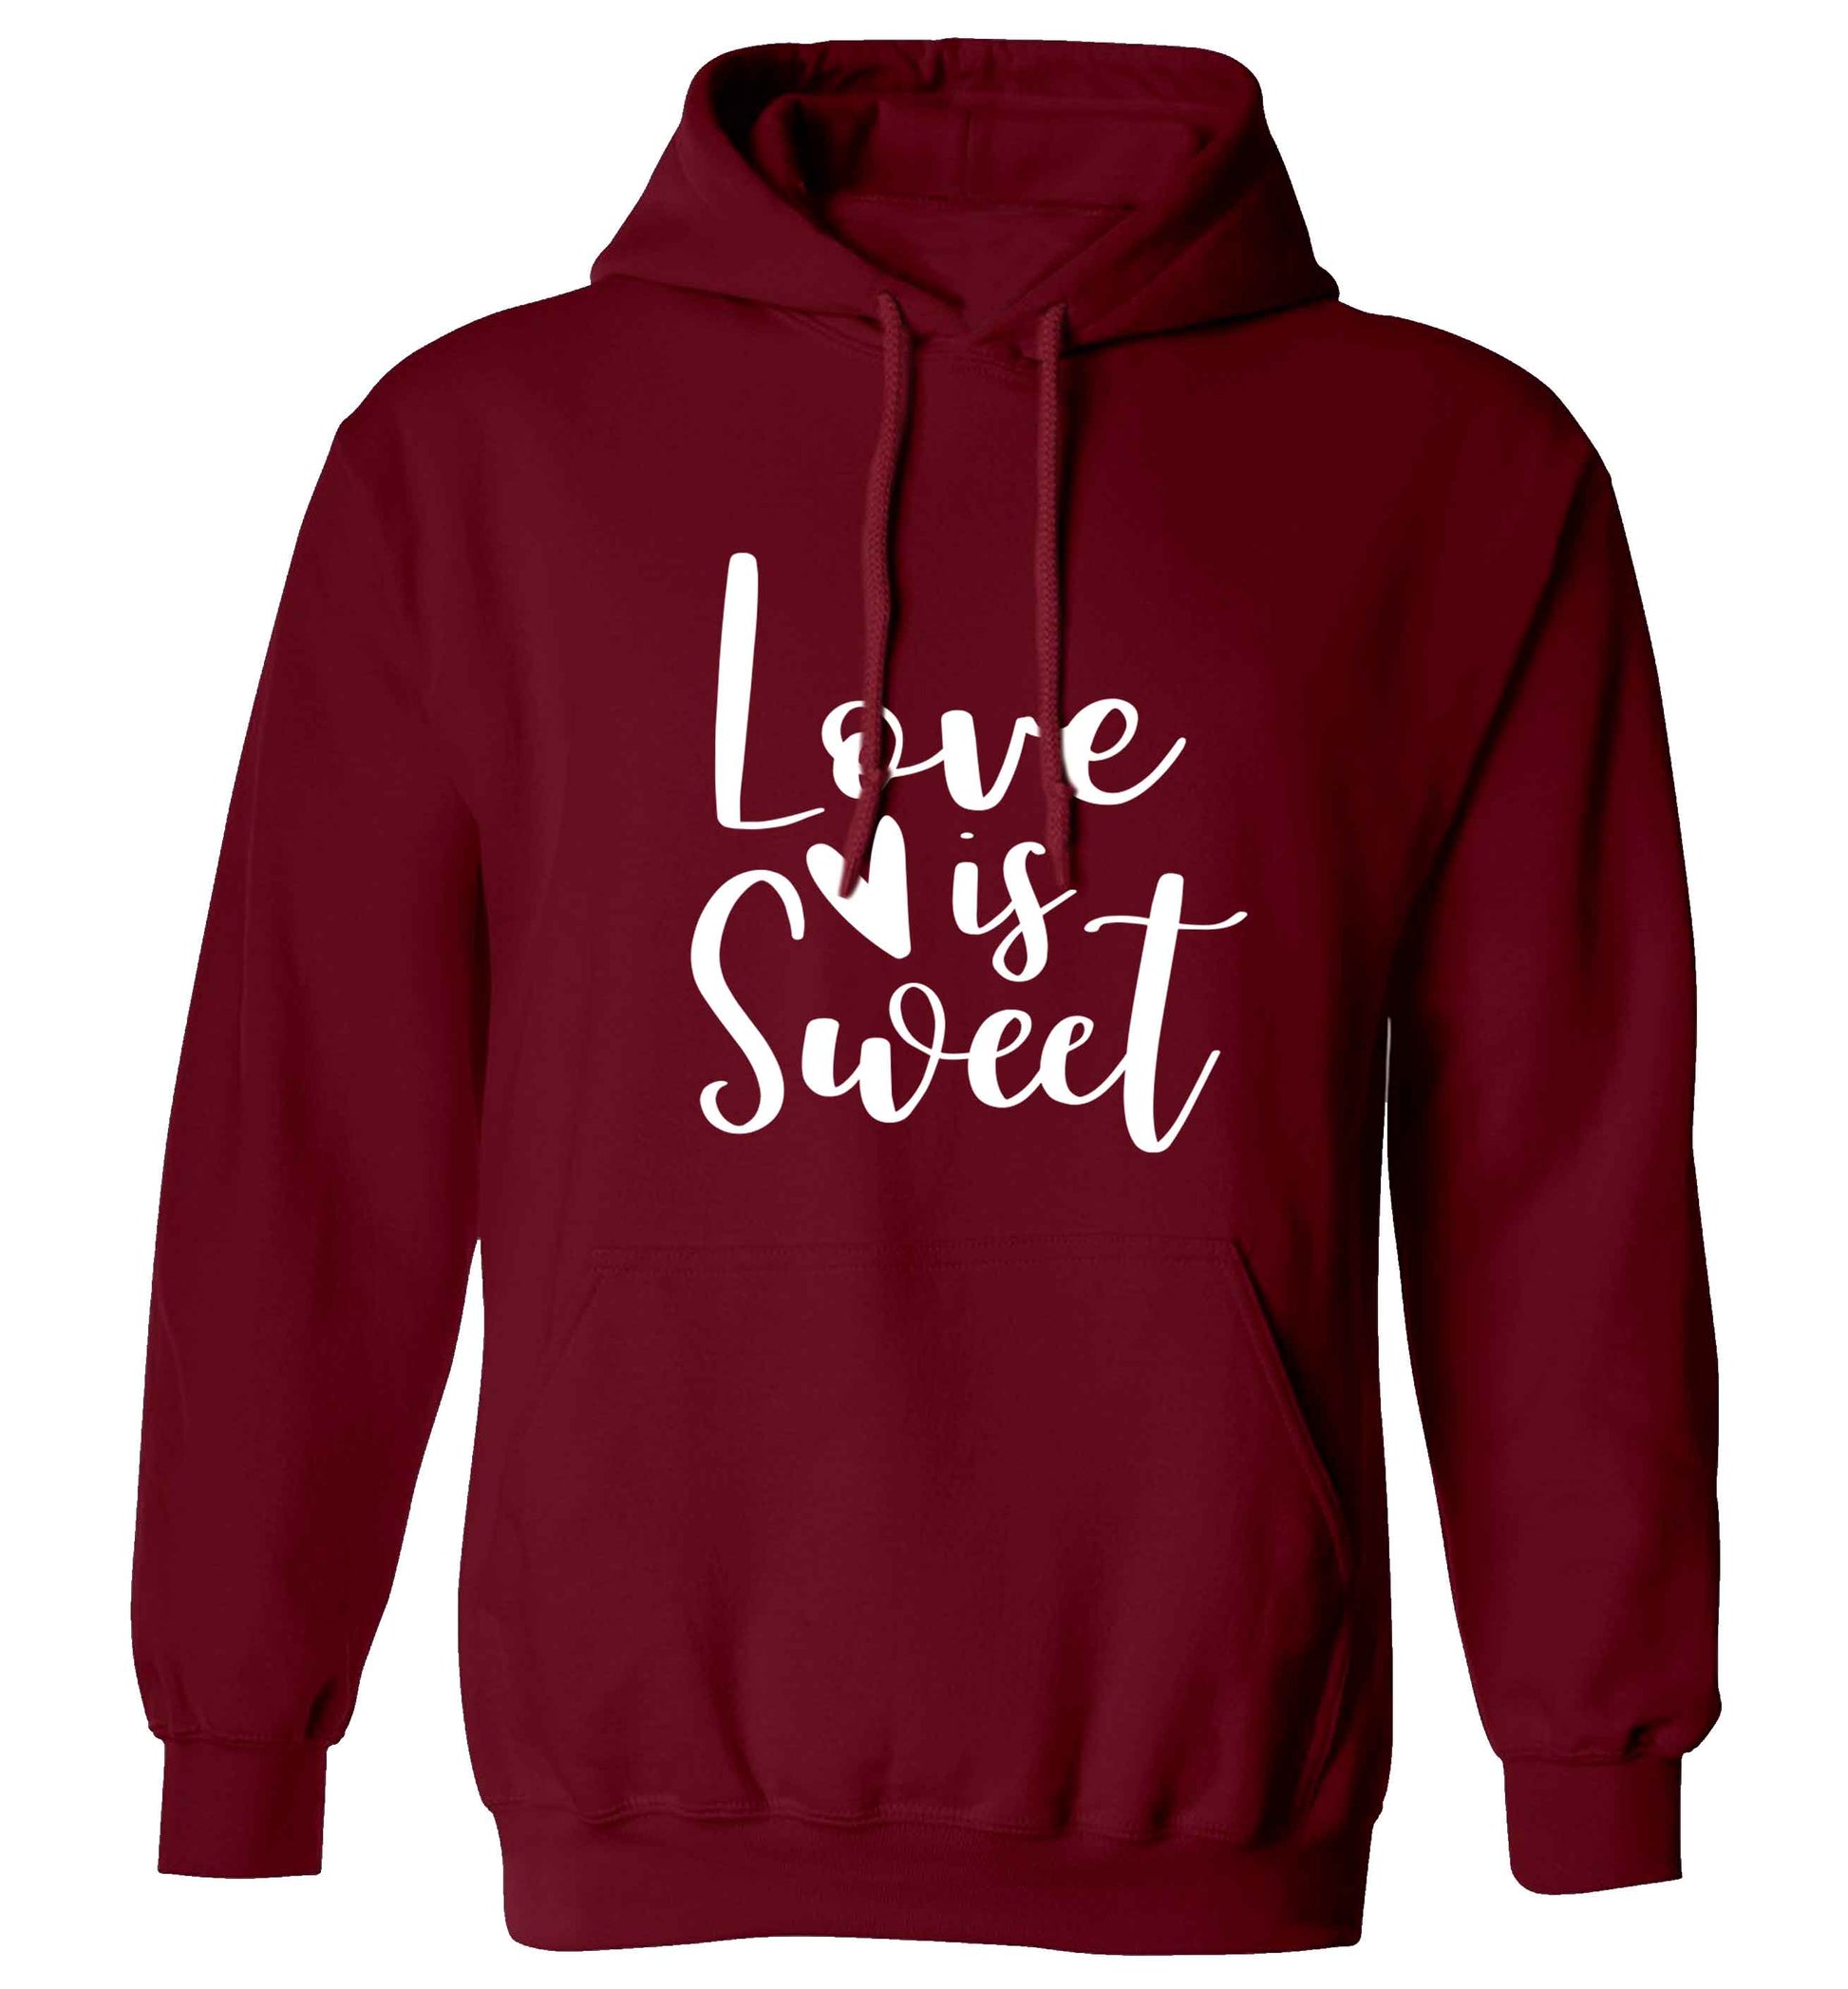 Love really does make the world go round! Ideal for weddings, valentines or just simply to show someone you love them!  adults unisex maroon hoodie 2XL